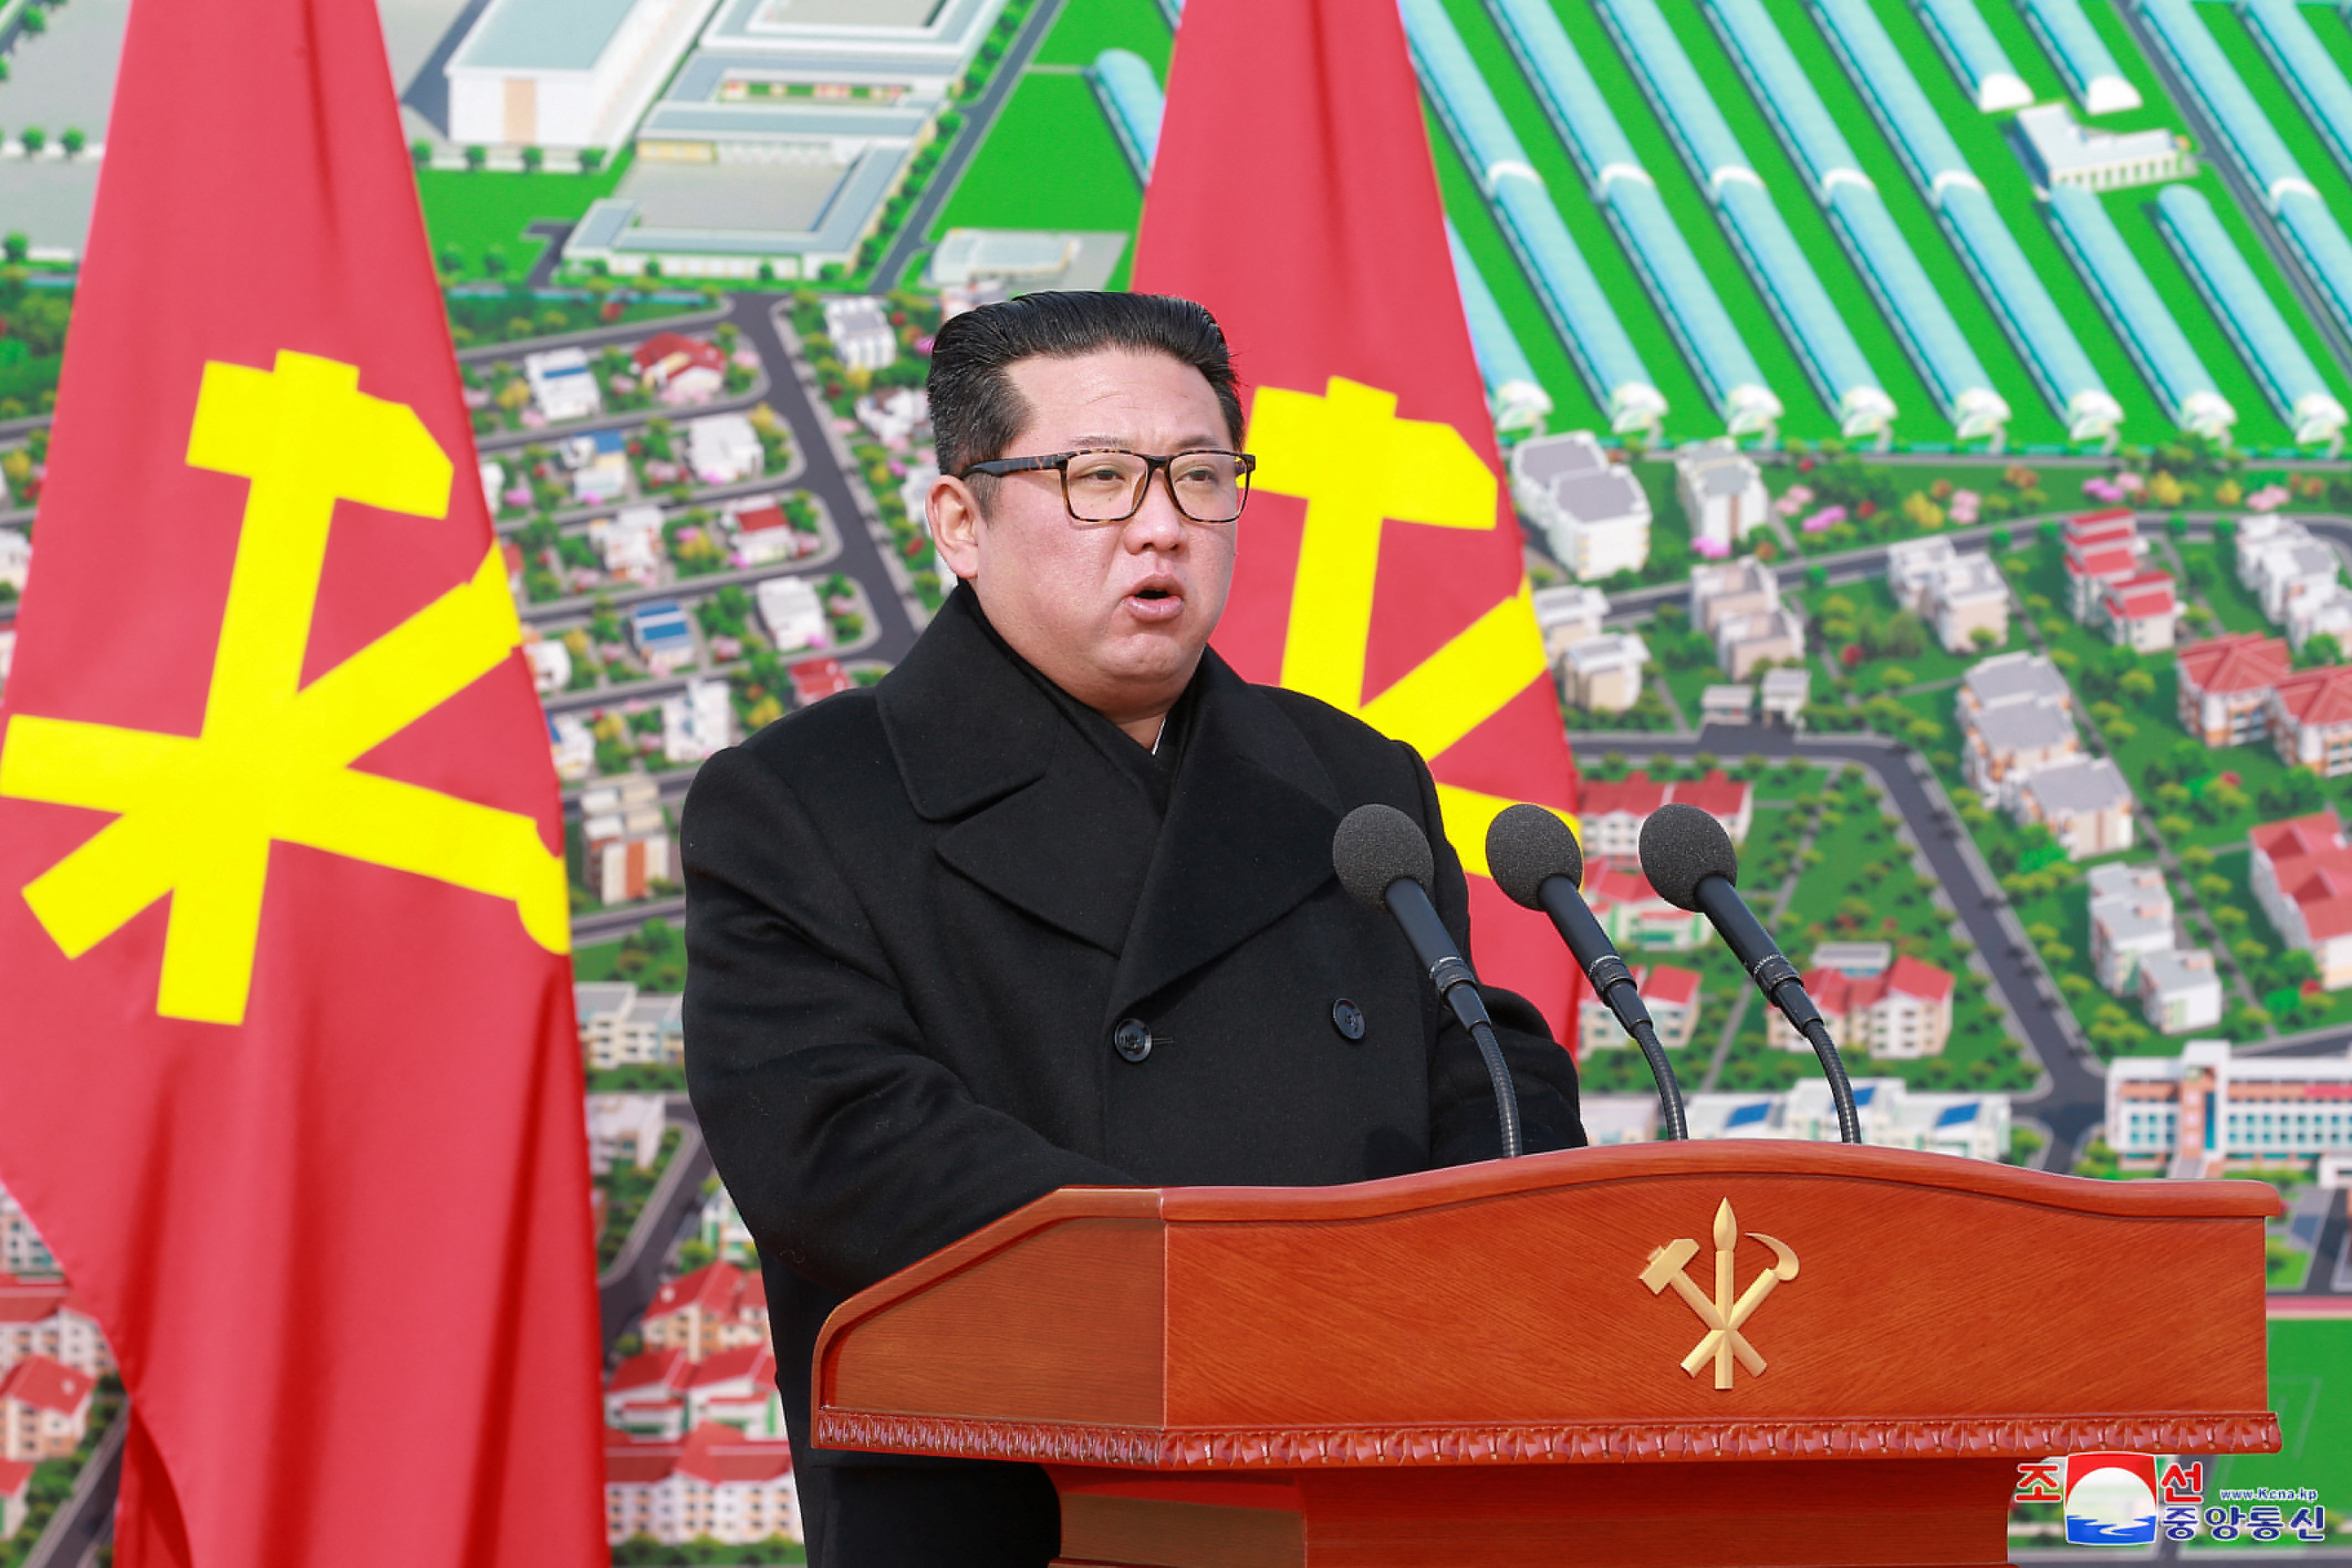 North Korean leader Kim Jong Un attends the ground-breaking ceremony for construction of Ryonpho Greenhouse Farm Held in Ryonpho area of Hamju County, South Hamgyong Province of the DPRK